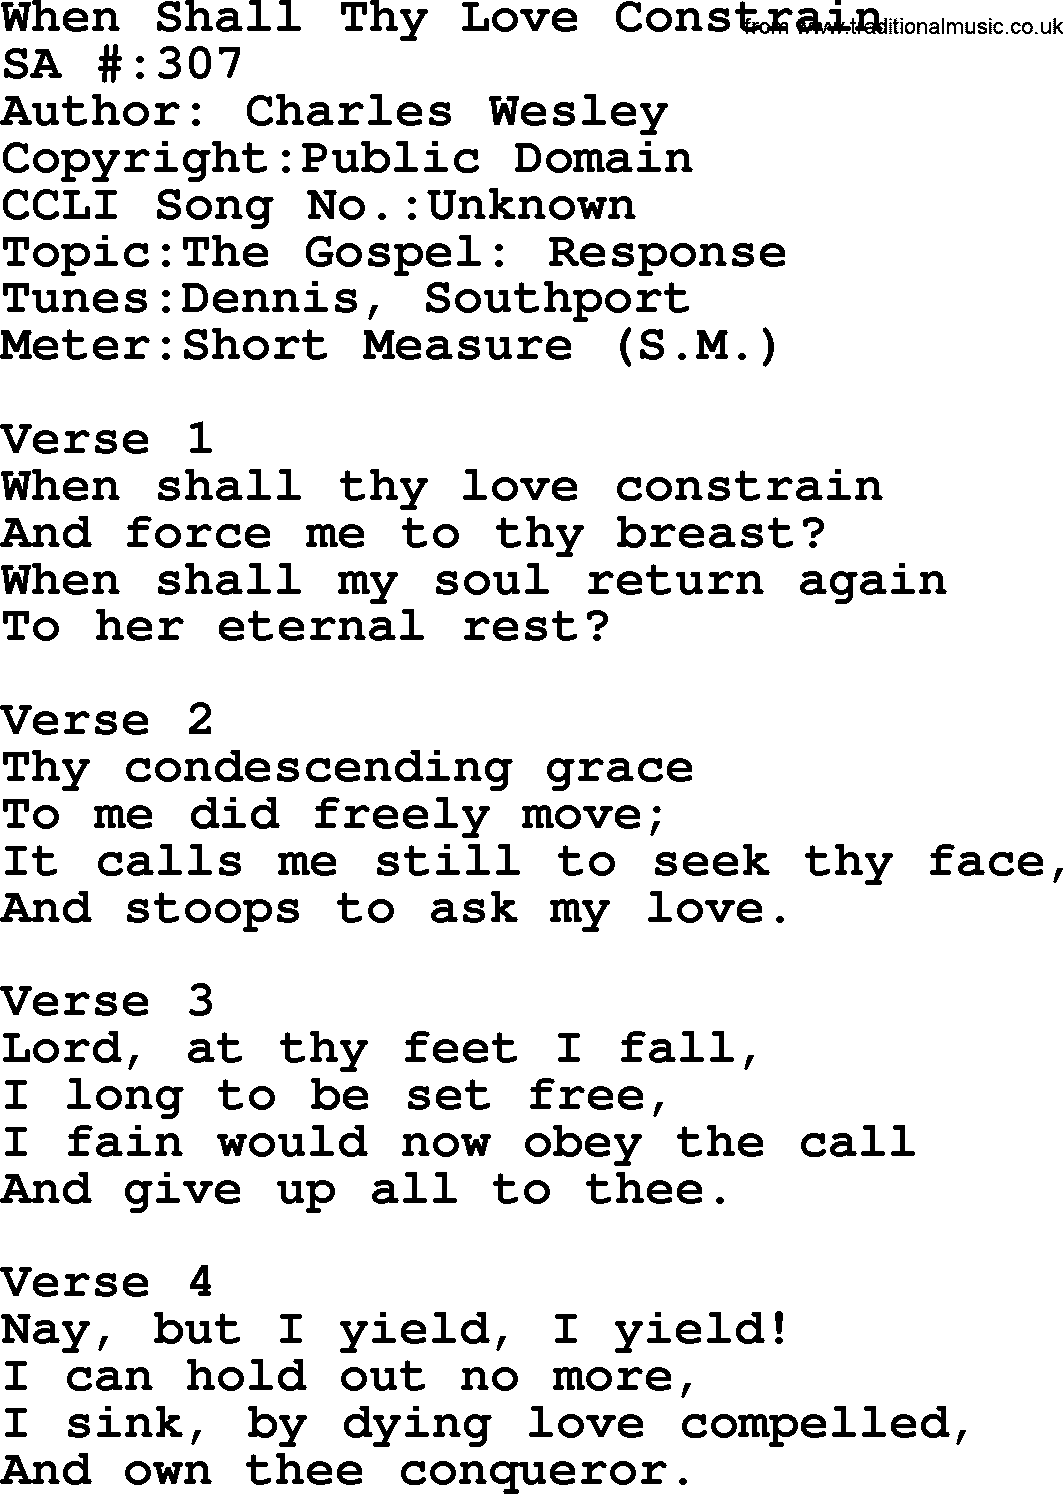 Salvation Army Hymnal, title: When Shall Thy Love Constrain, with lyrics and PDF,